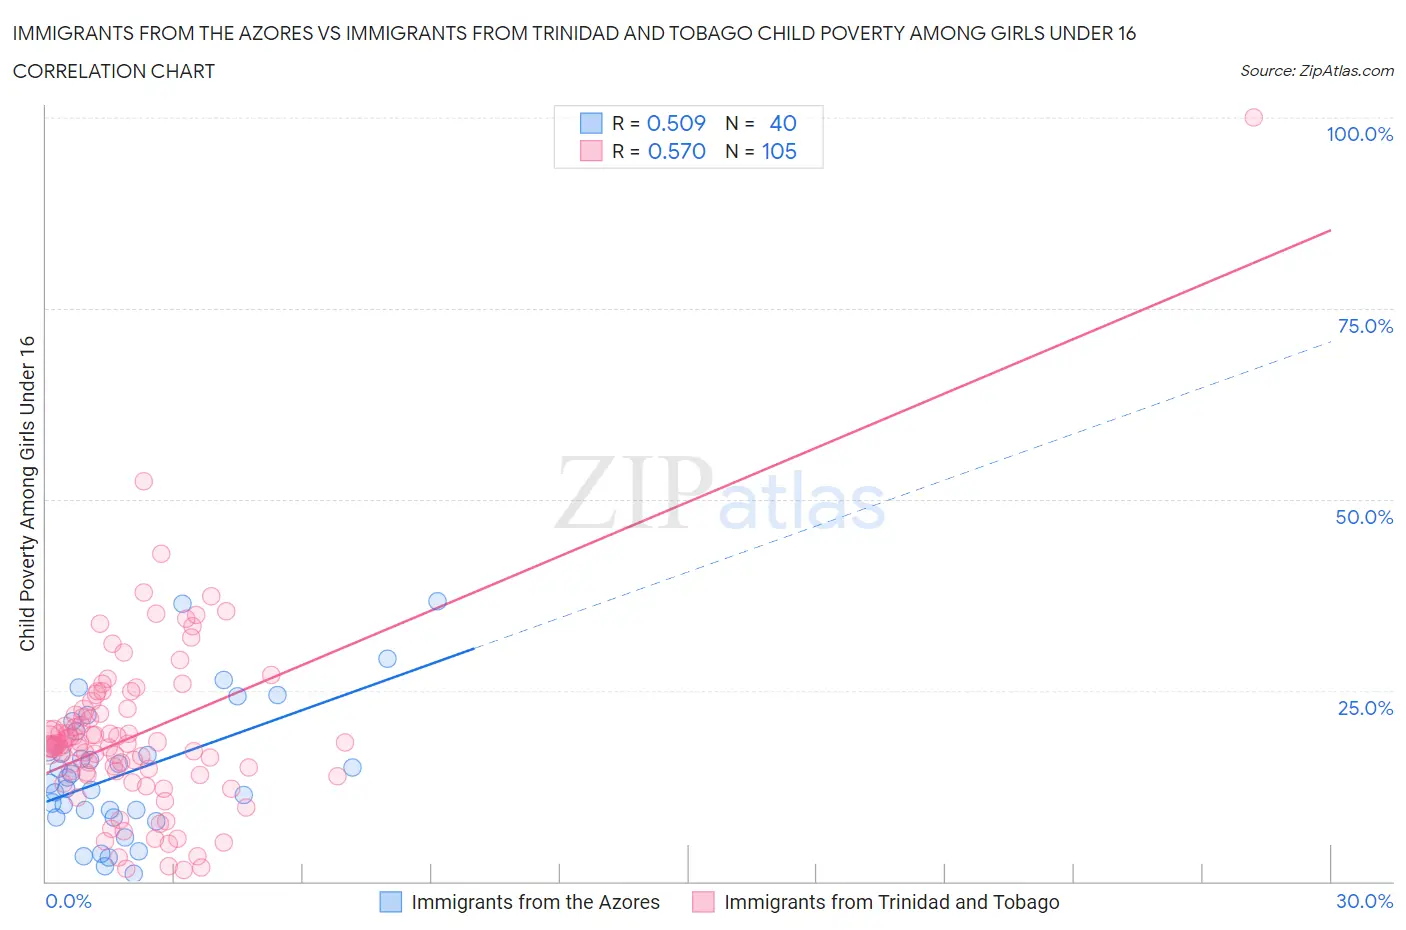 Immigrants from the Azores vs Immigrants from Trinidad and Tobago Child Poverty Among Girls Under 16